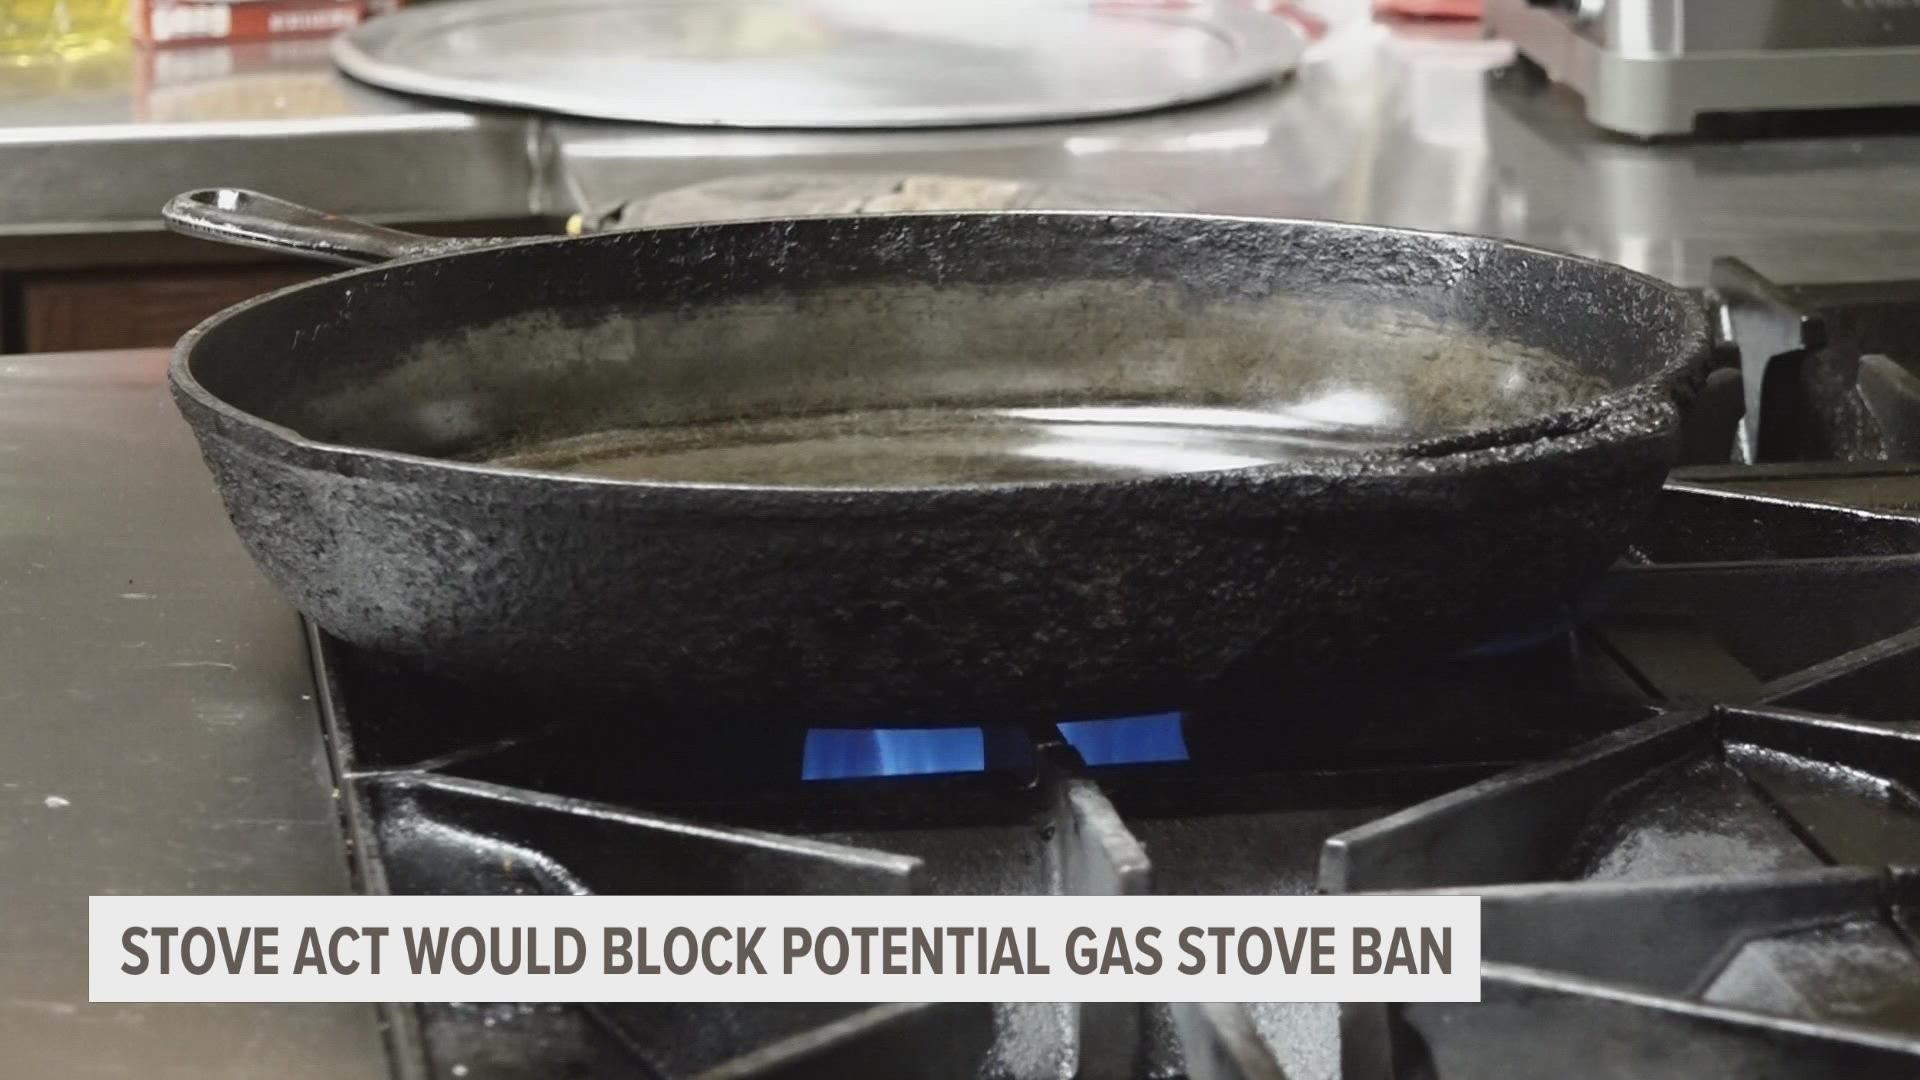 Federal officials may be considering a ban on gas stoves because of health concerns to children.